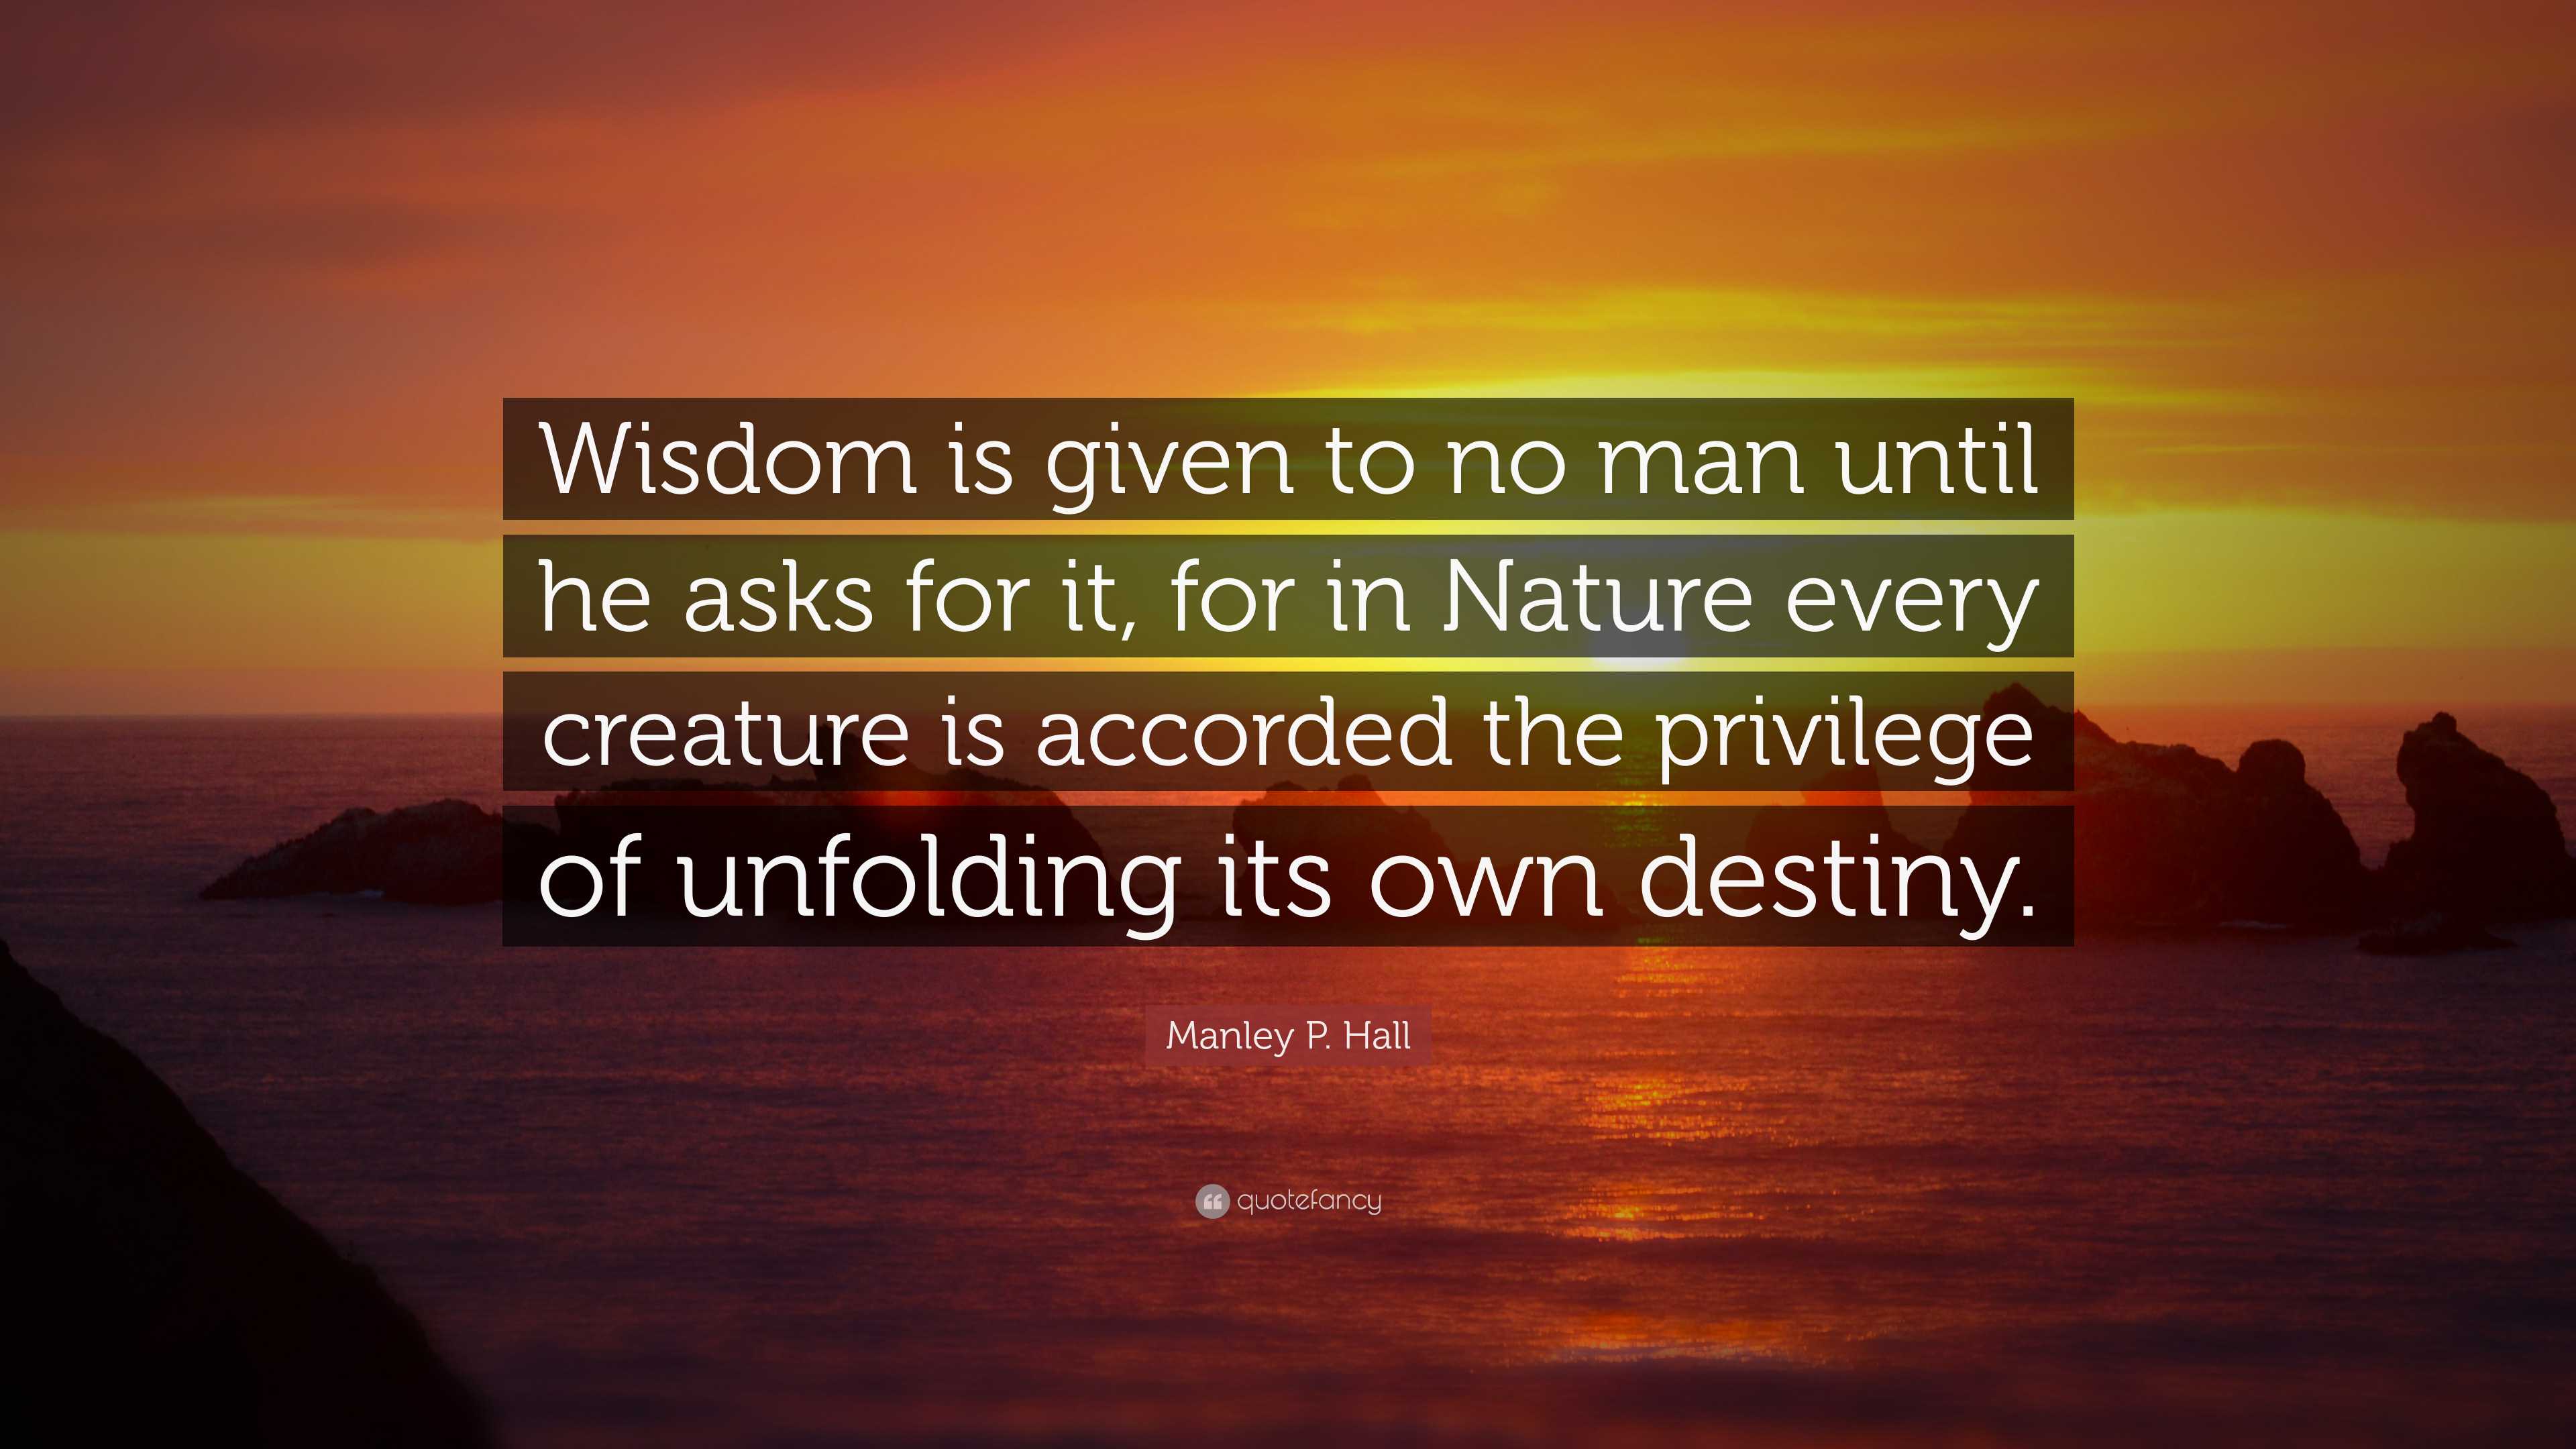 Manley P. Hall Quote: “Wisdom is given to no man until he asks for it ...